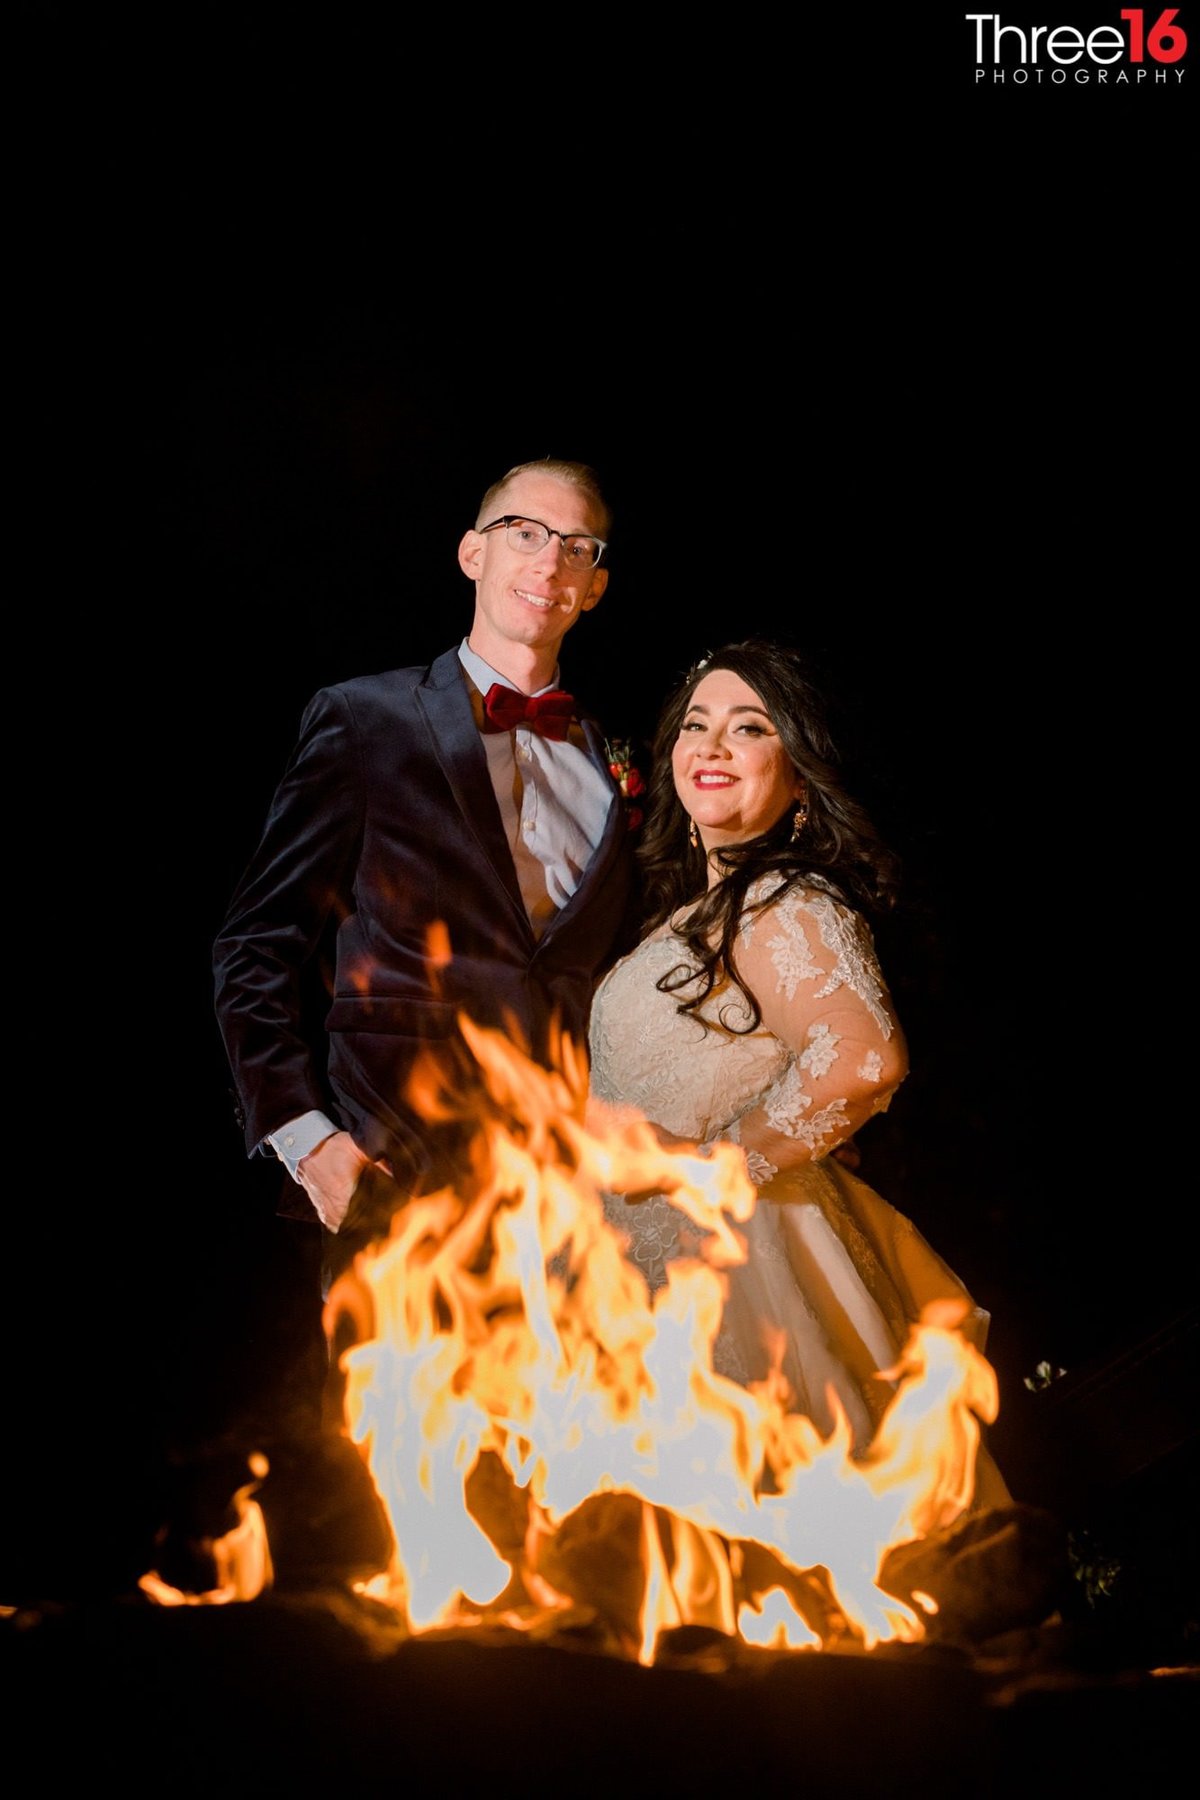 Bride and Groom pose behind a lit up fire pit